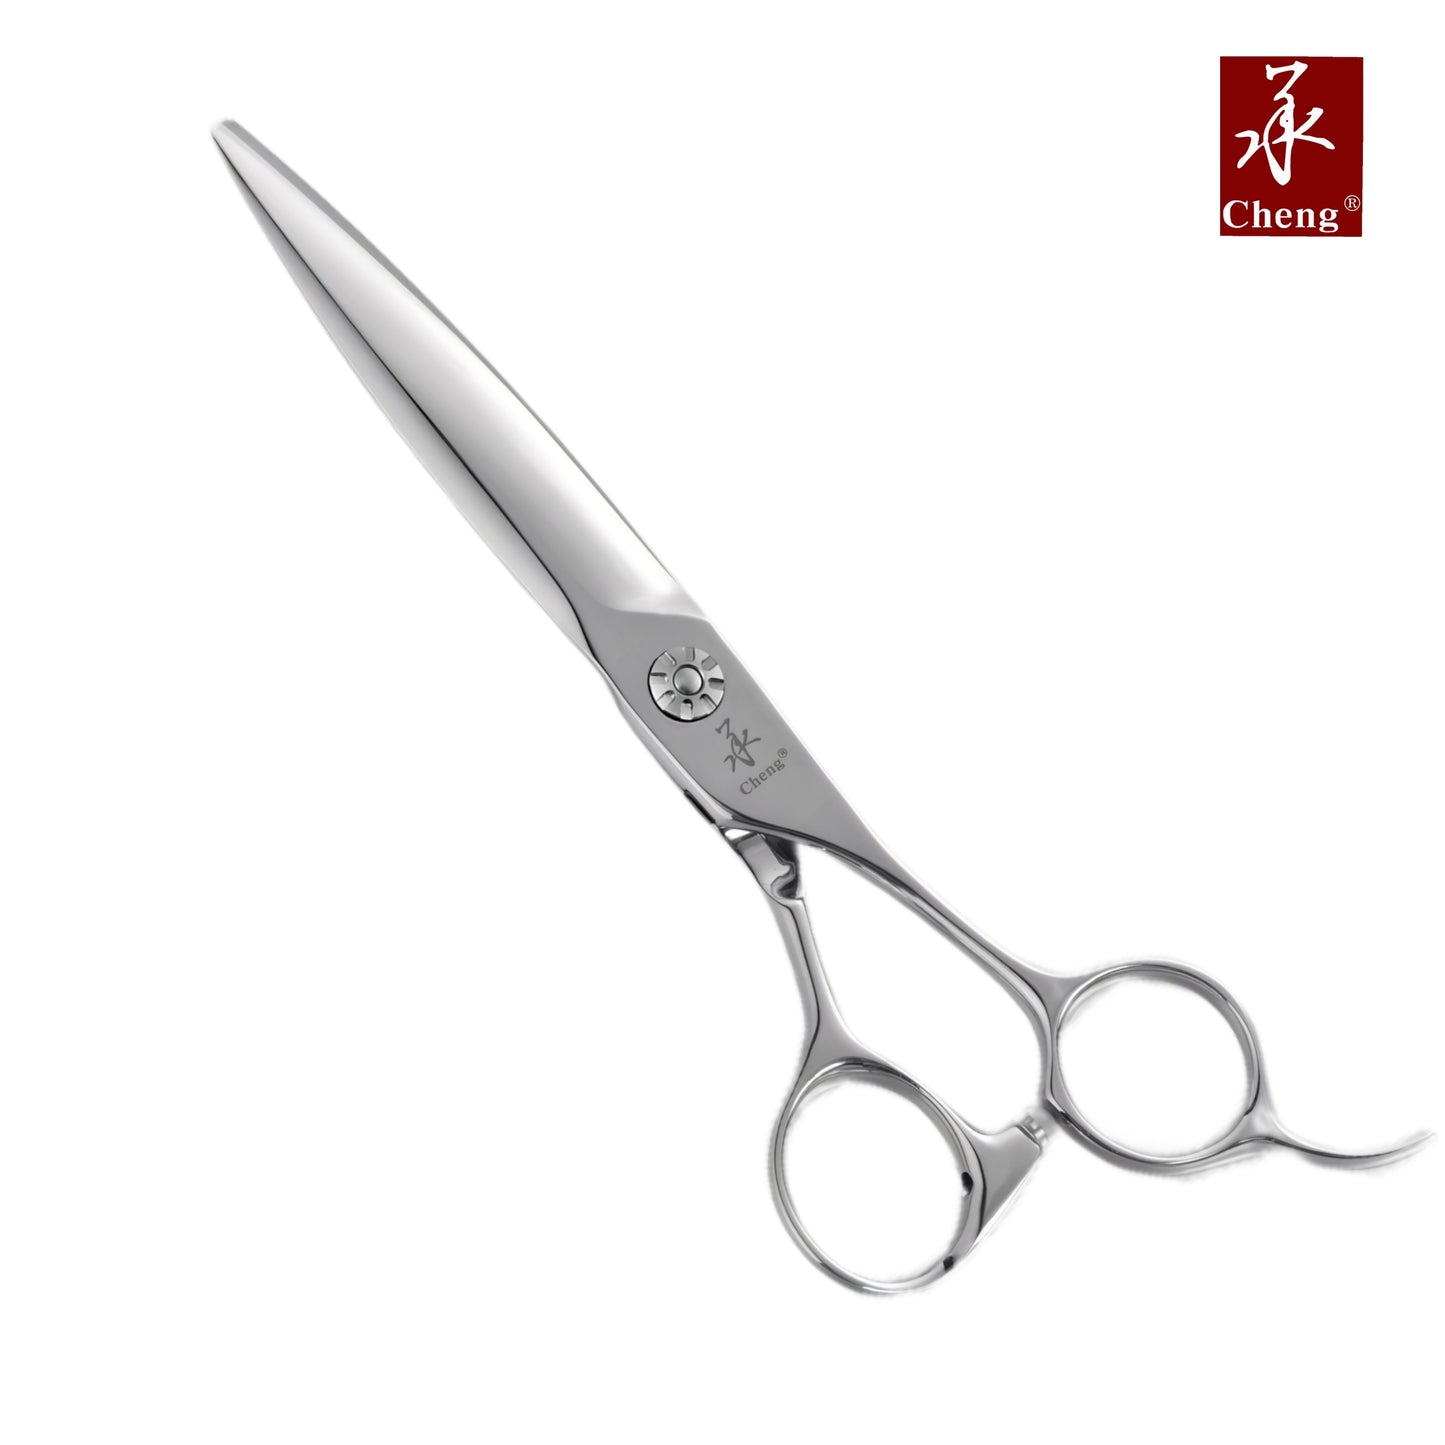 BF-625C Hair Cutting Scissors Professional Hairdressing Shear 6.0Inch 25T About=25%